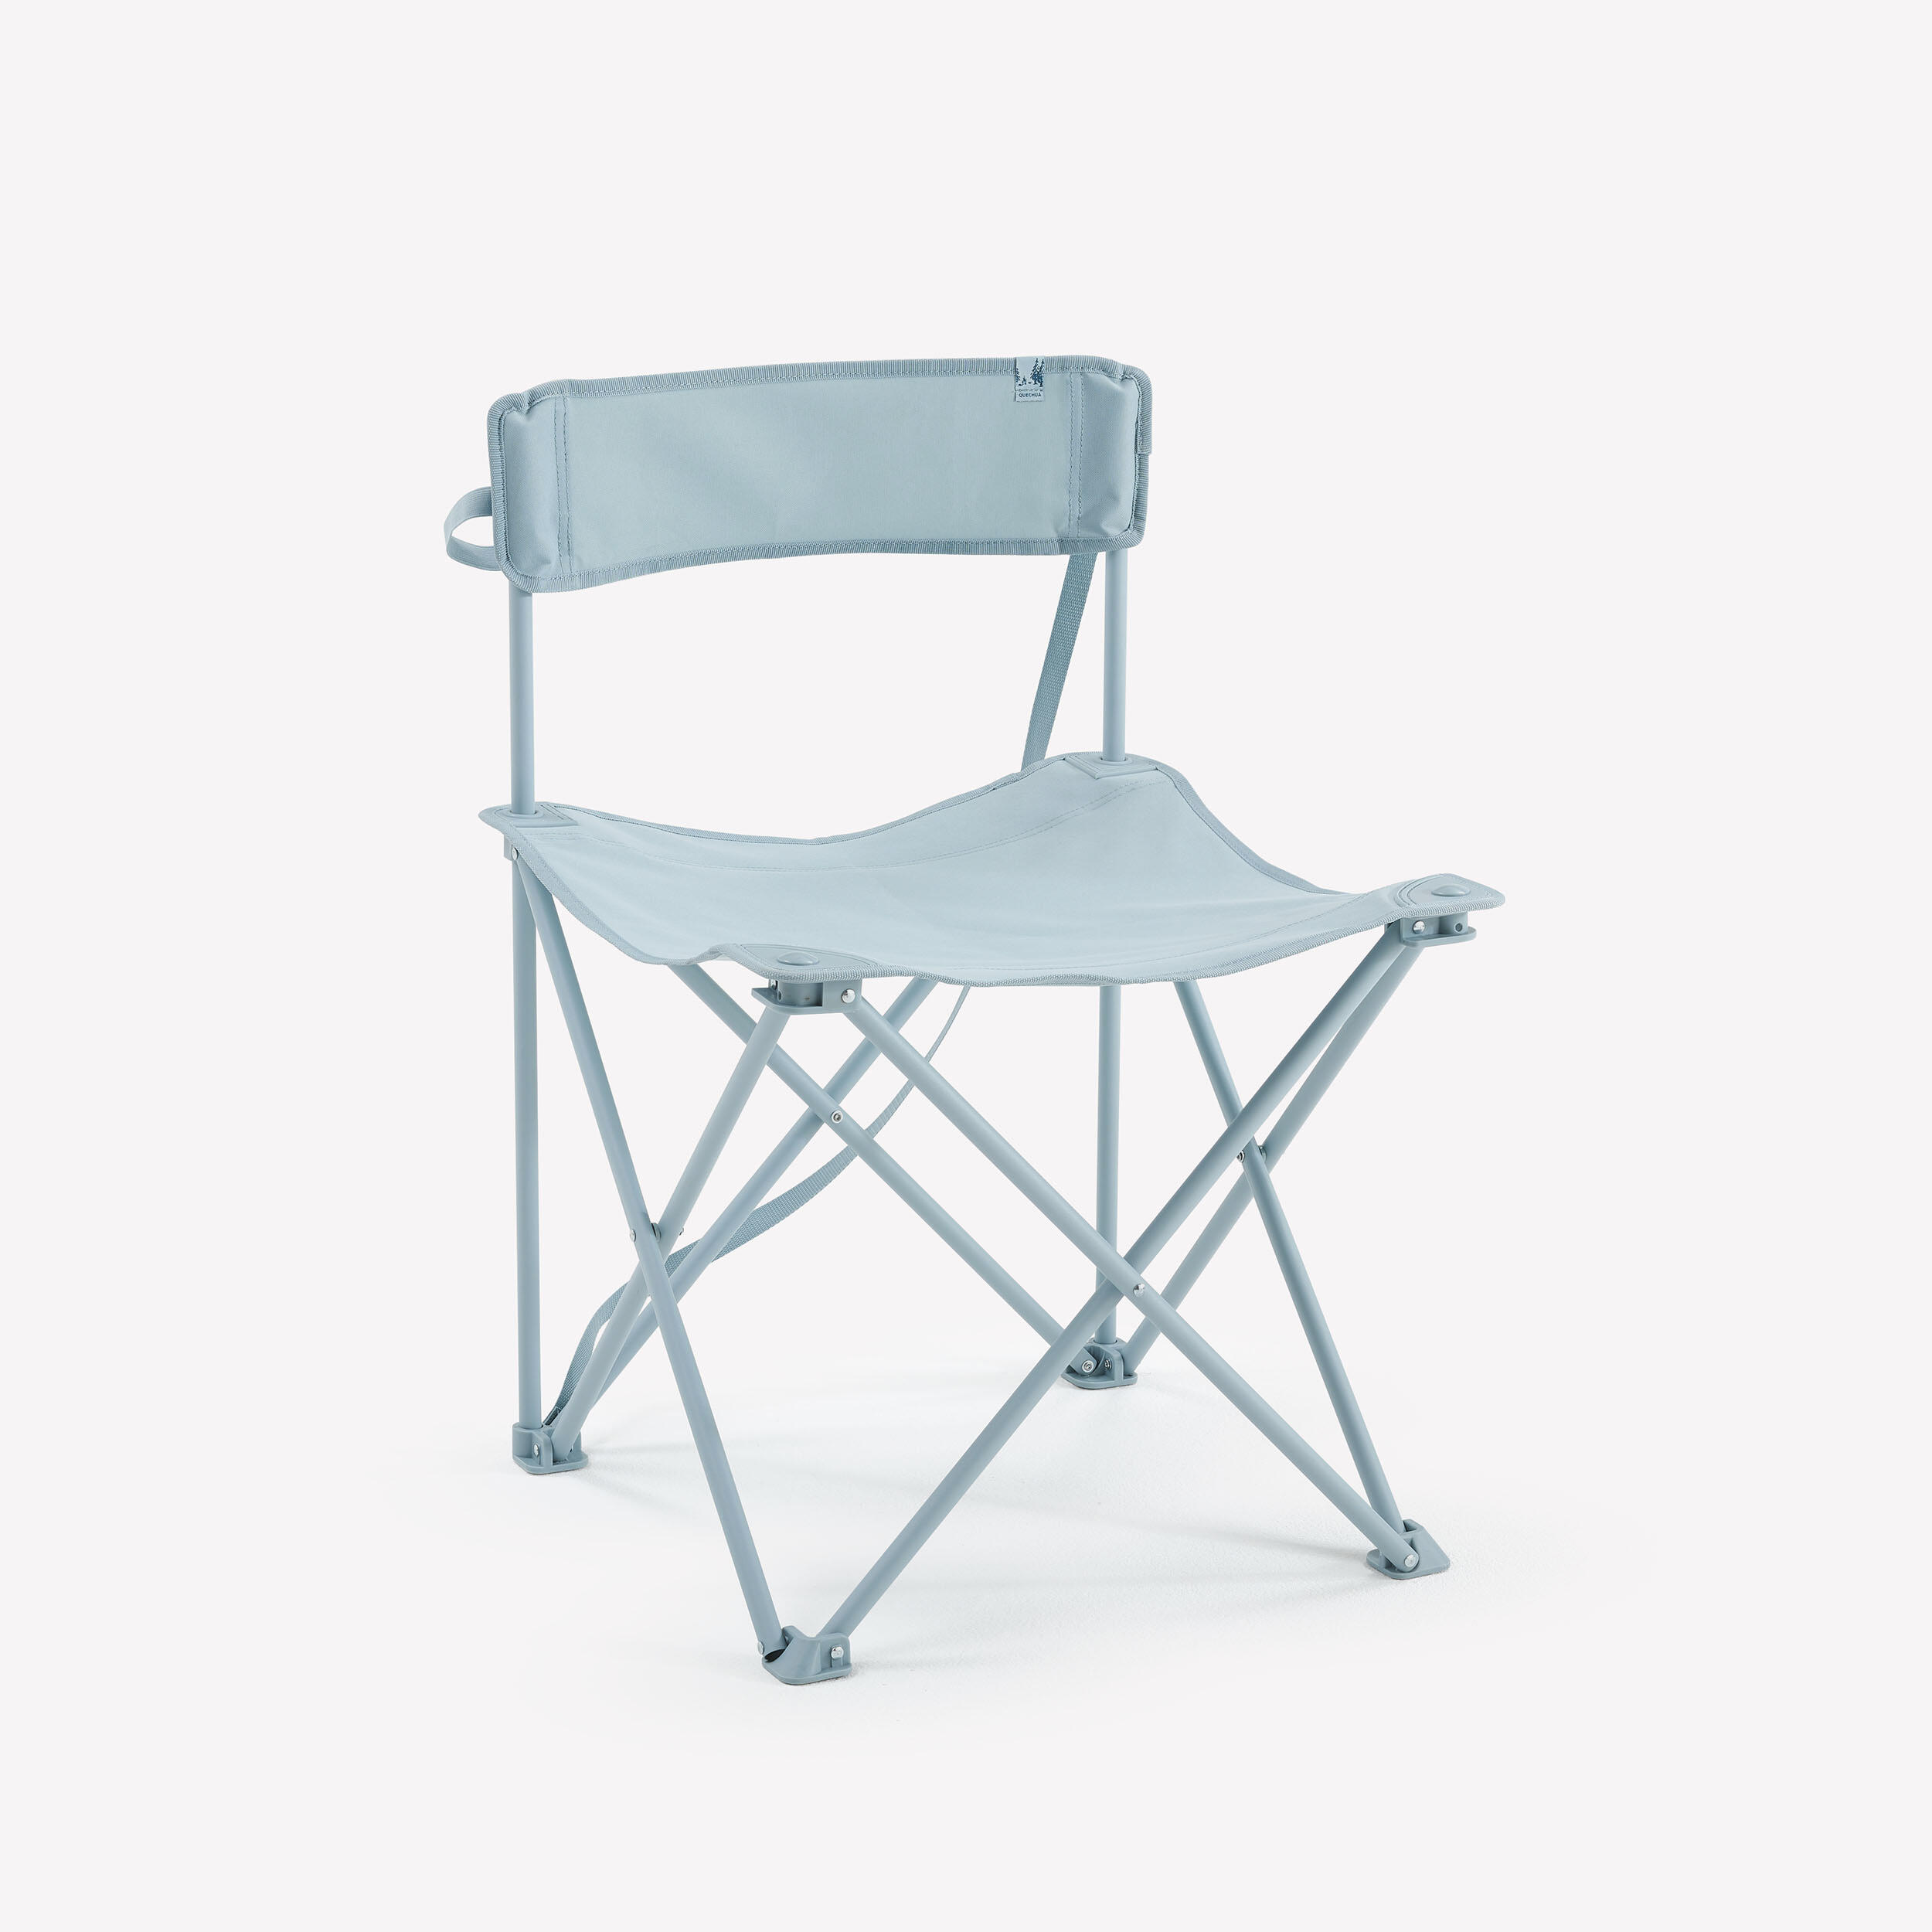 Folding Camping Chair 1/6